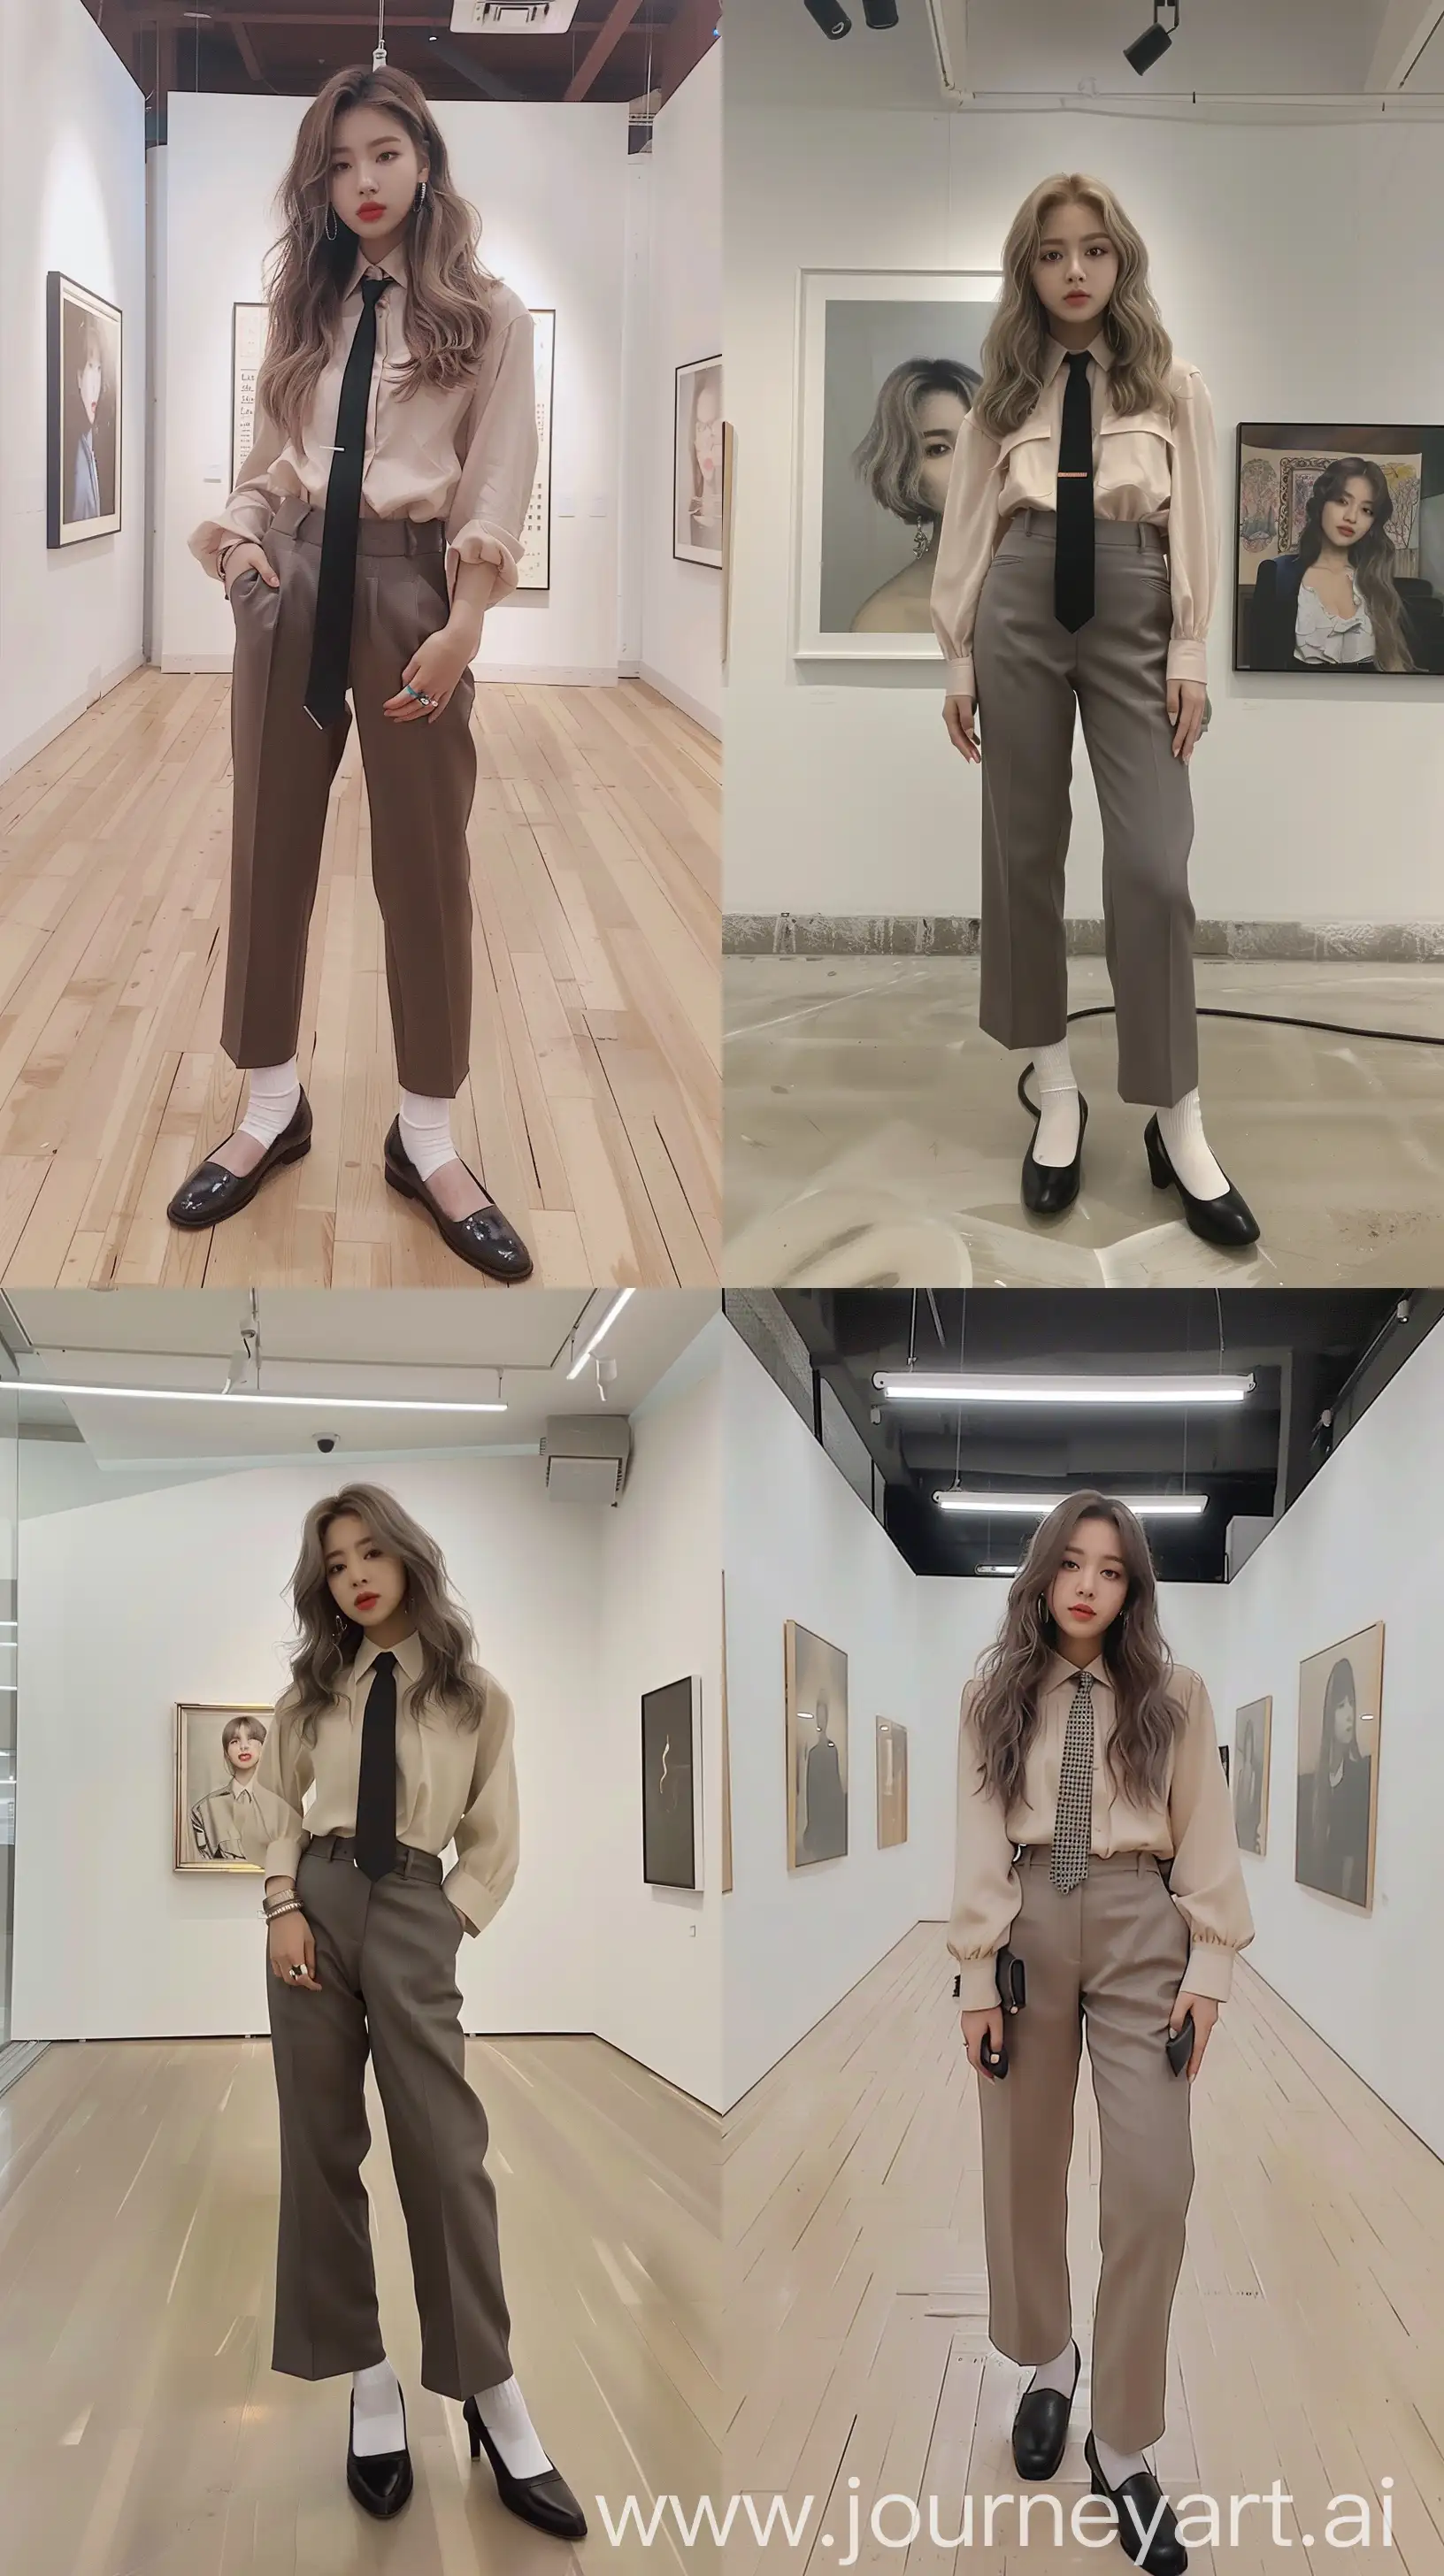 a selfie blackpink's jennie, medium wavy wolfcut hair, tie, wearing simple blouse and suit pants, black flat loafers shoes, white socks, standing in art gallery --ar 9:16